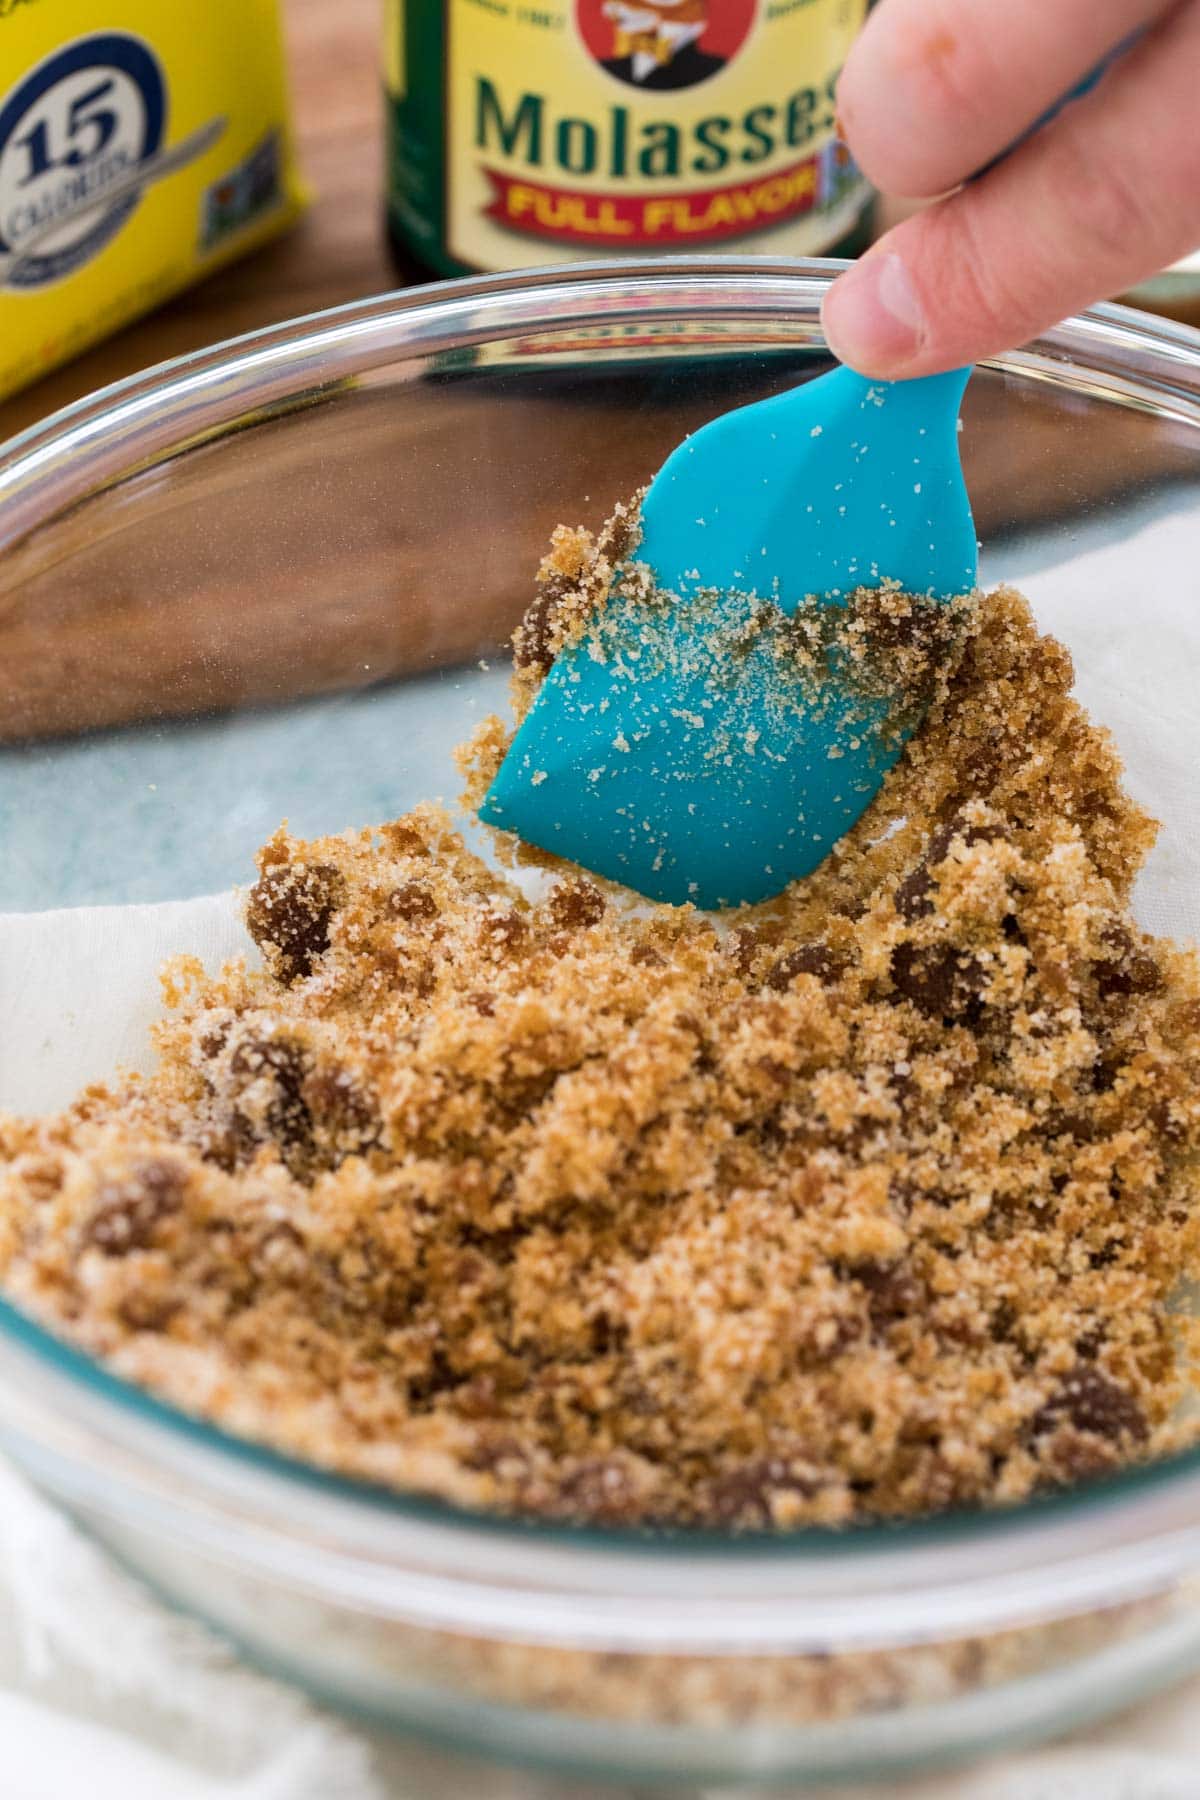 Mixing brown sugar with a blue spatula